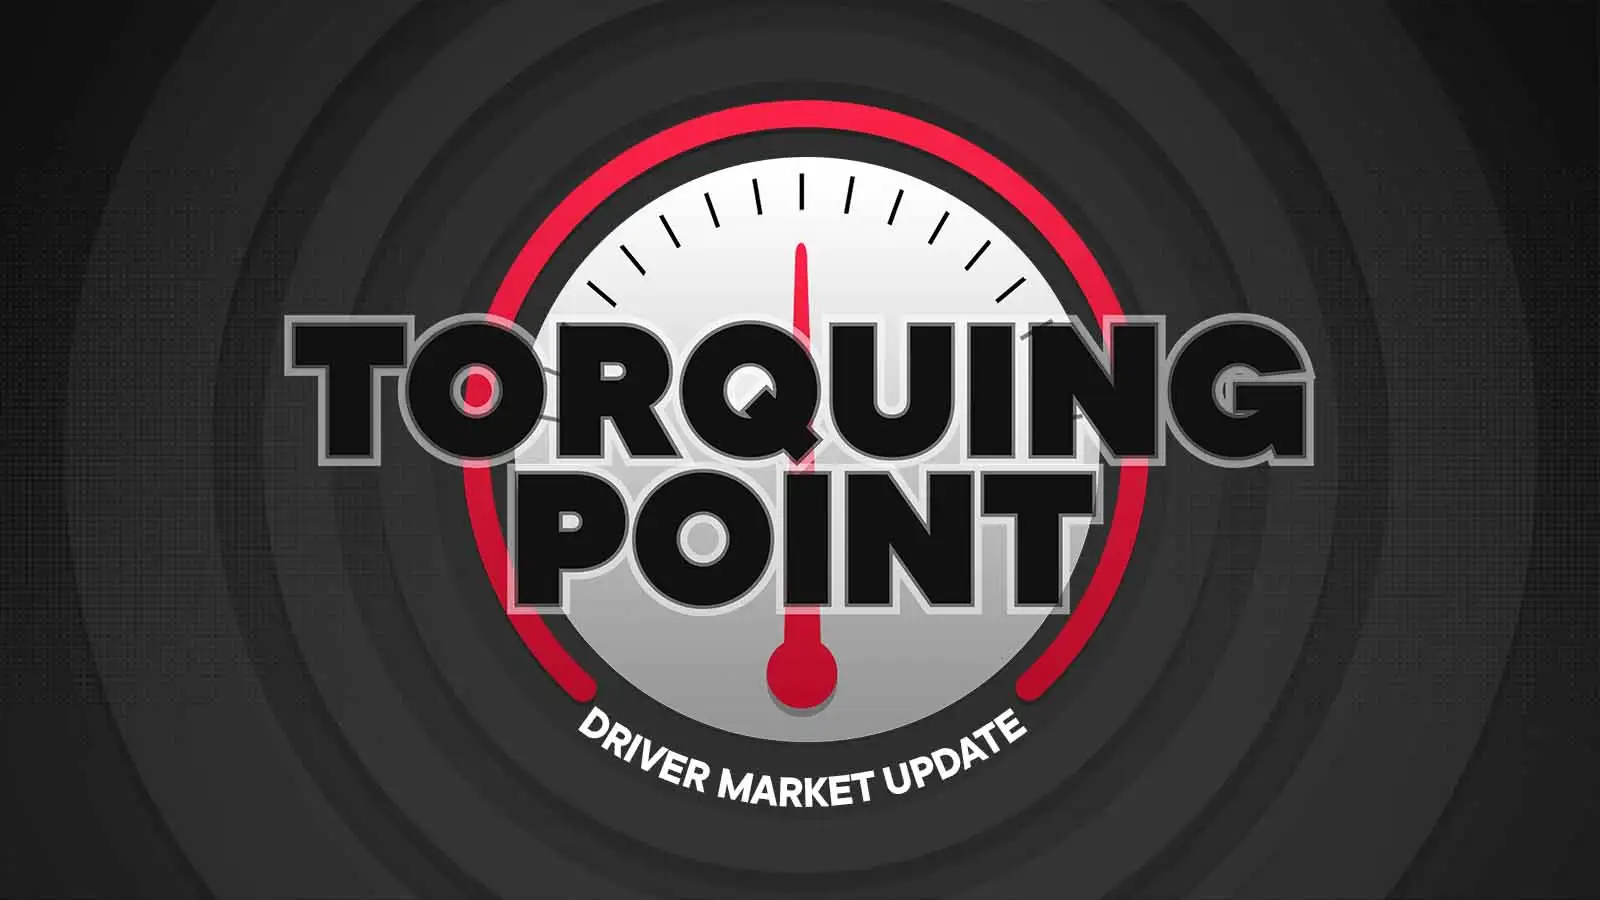 Torquing Point driver market 2023.